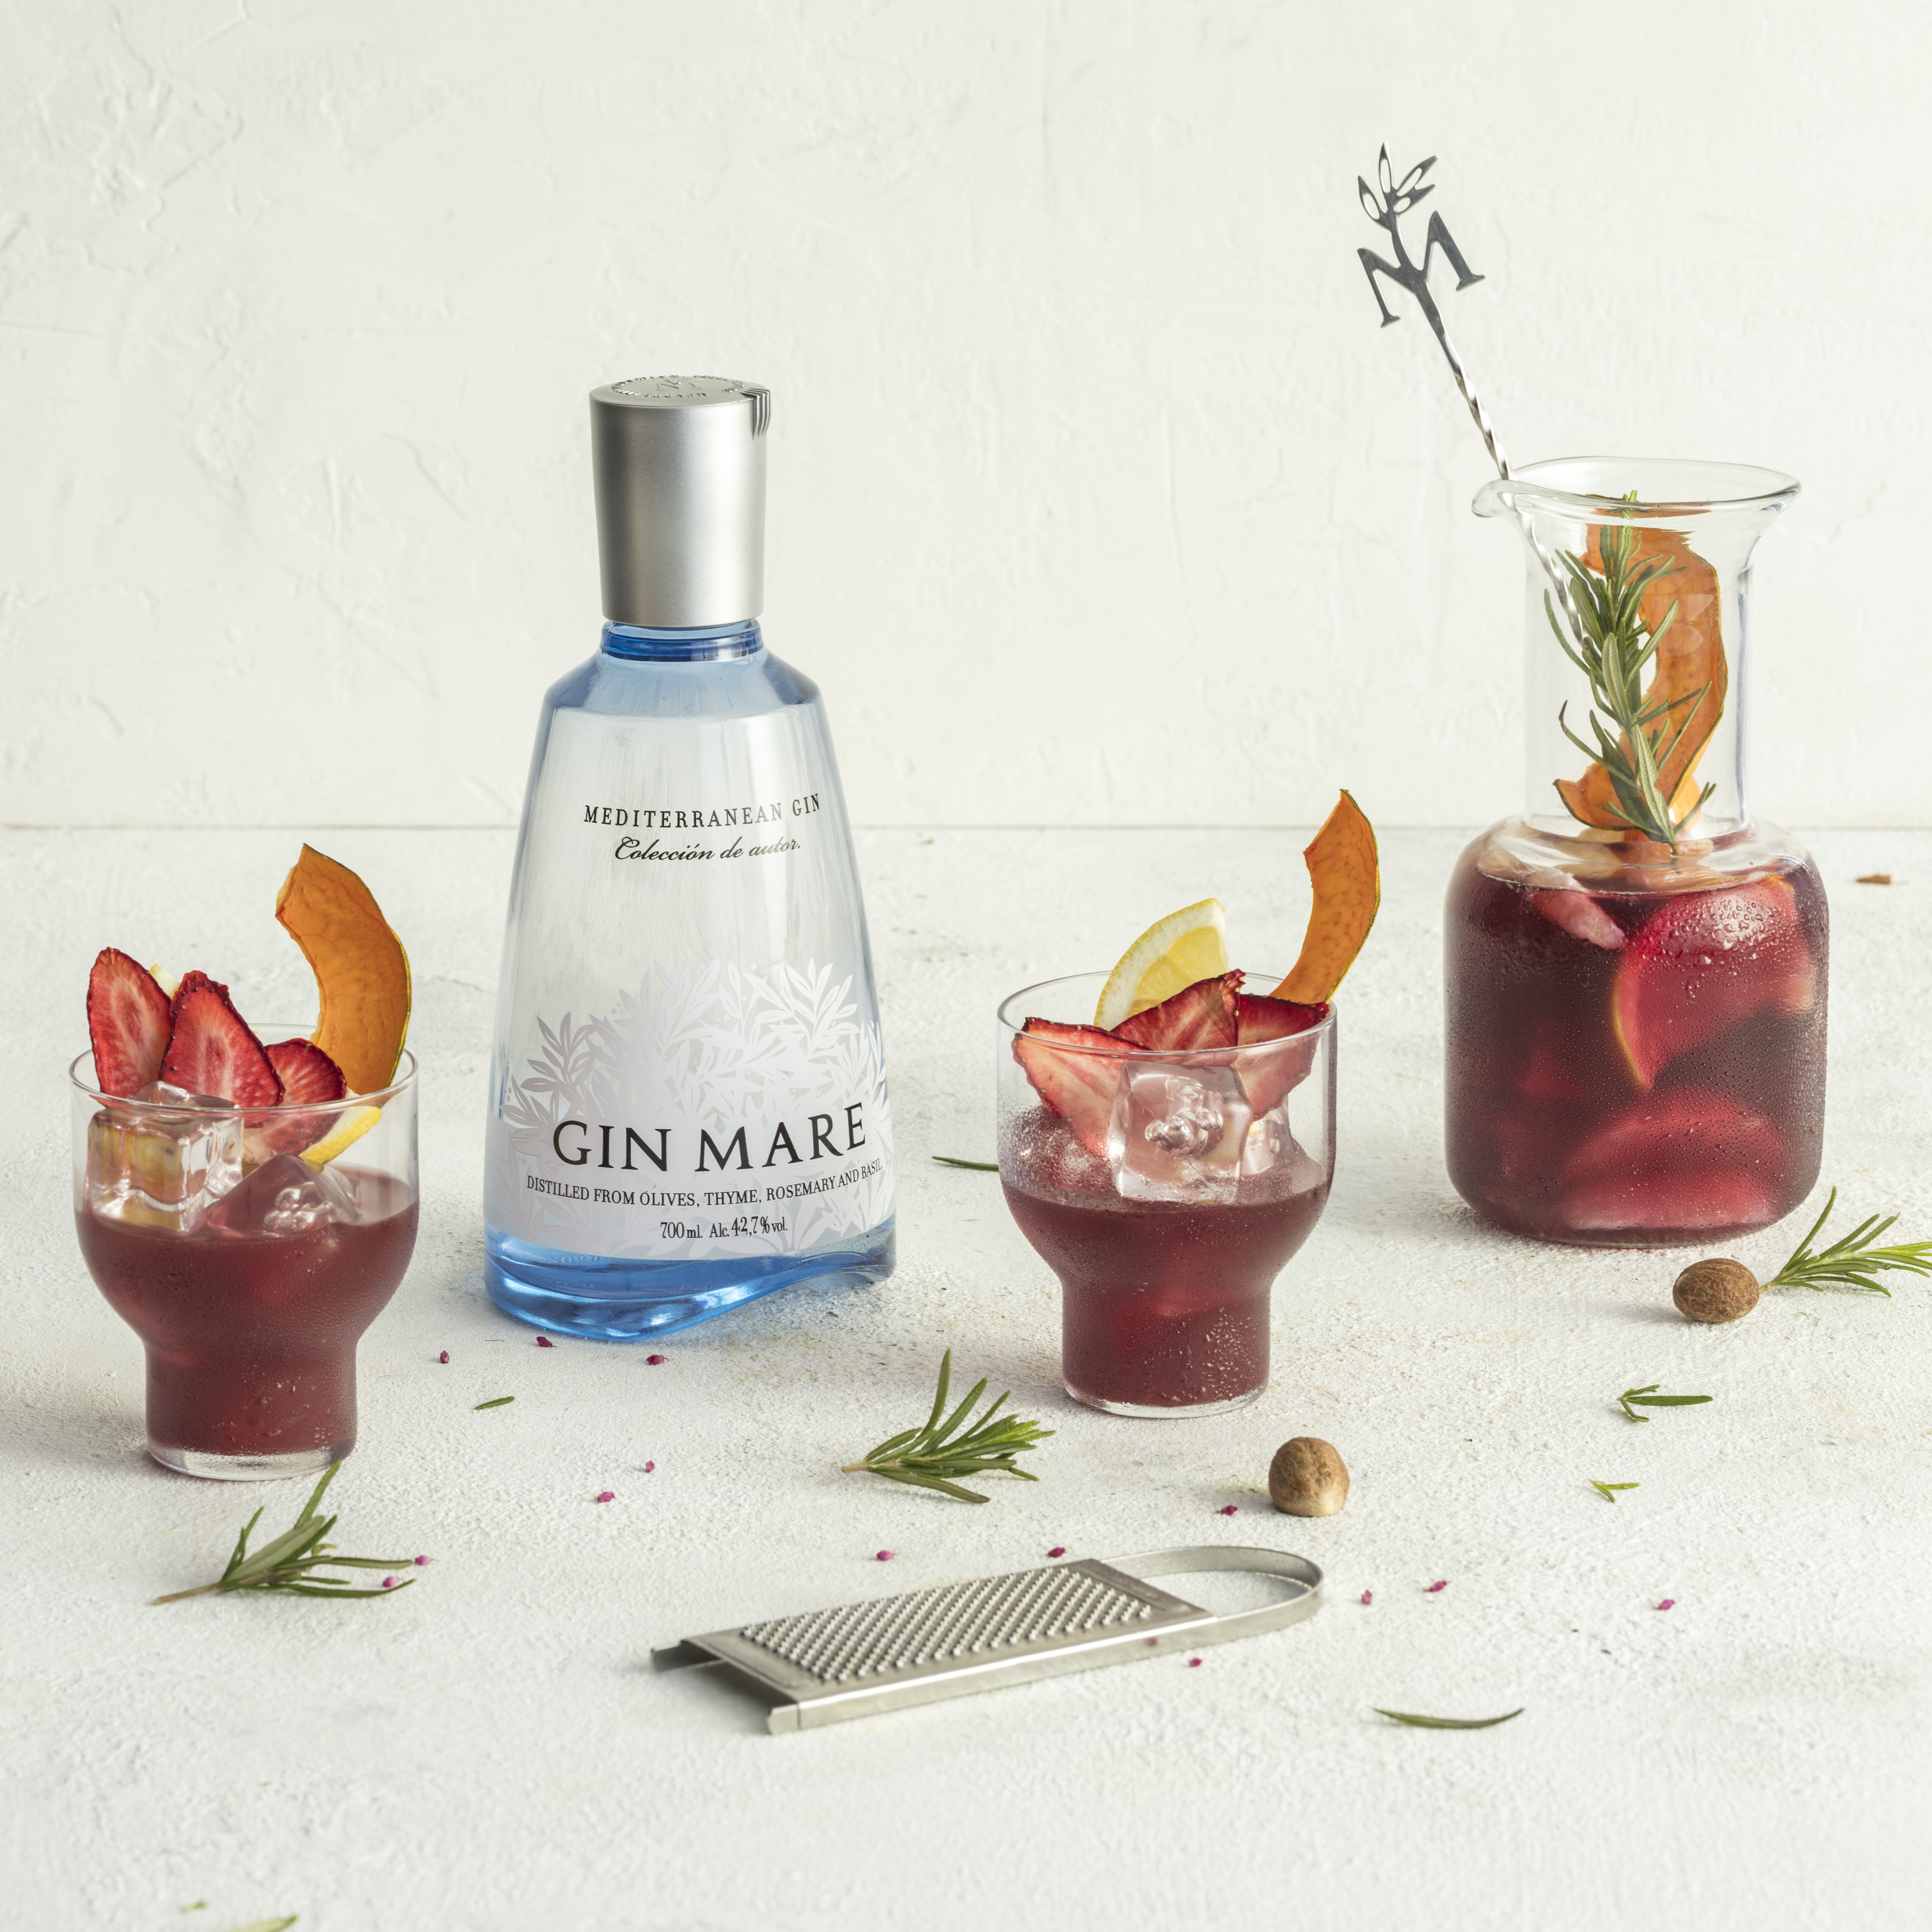 Celebrate World Gin Day with Gin Mare's Sangria Nostrum